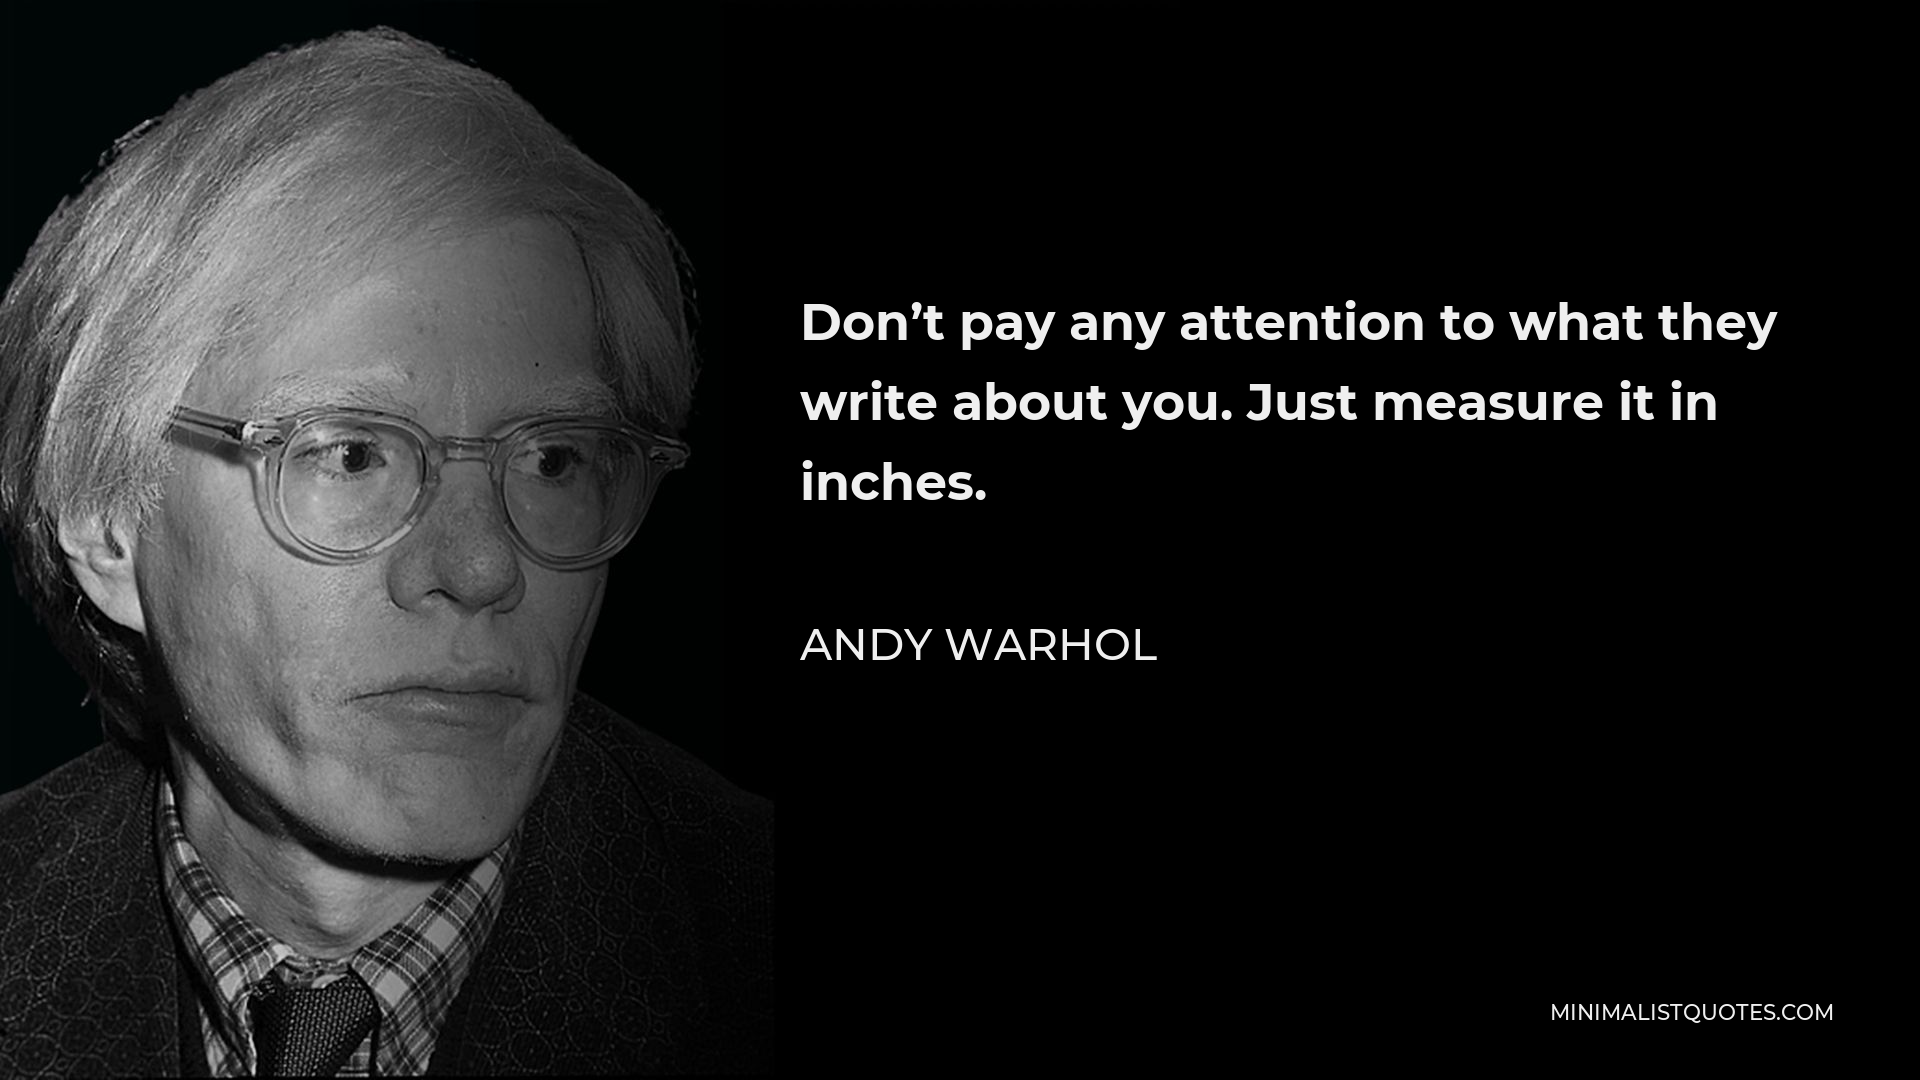 Andy Warhol Quote - Don’t pay any attention to what they write about you. Just measure it in inches.